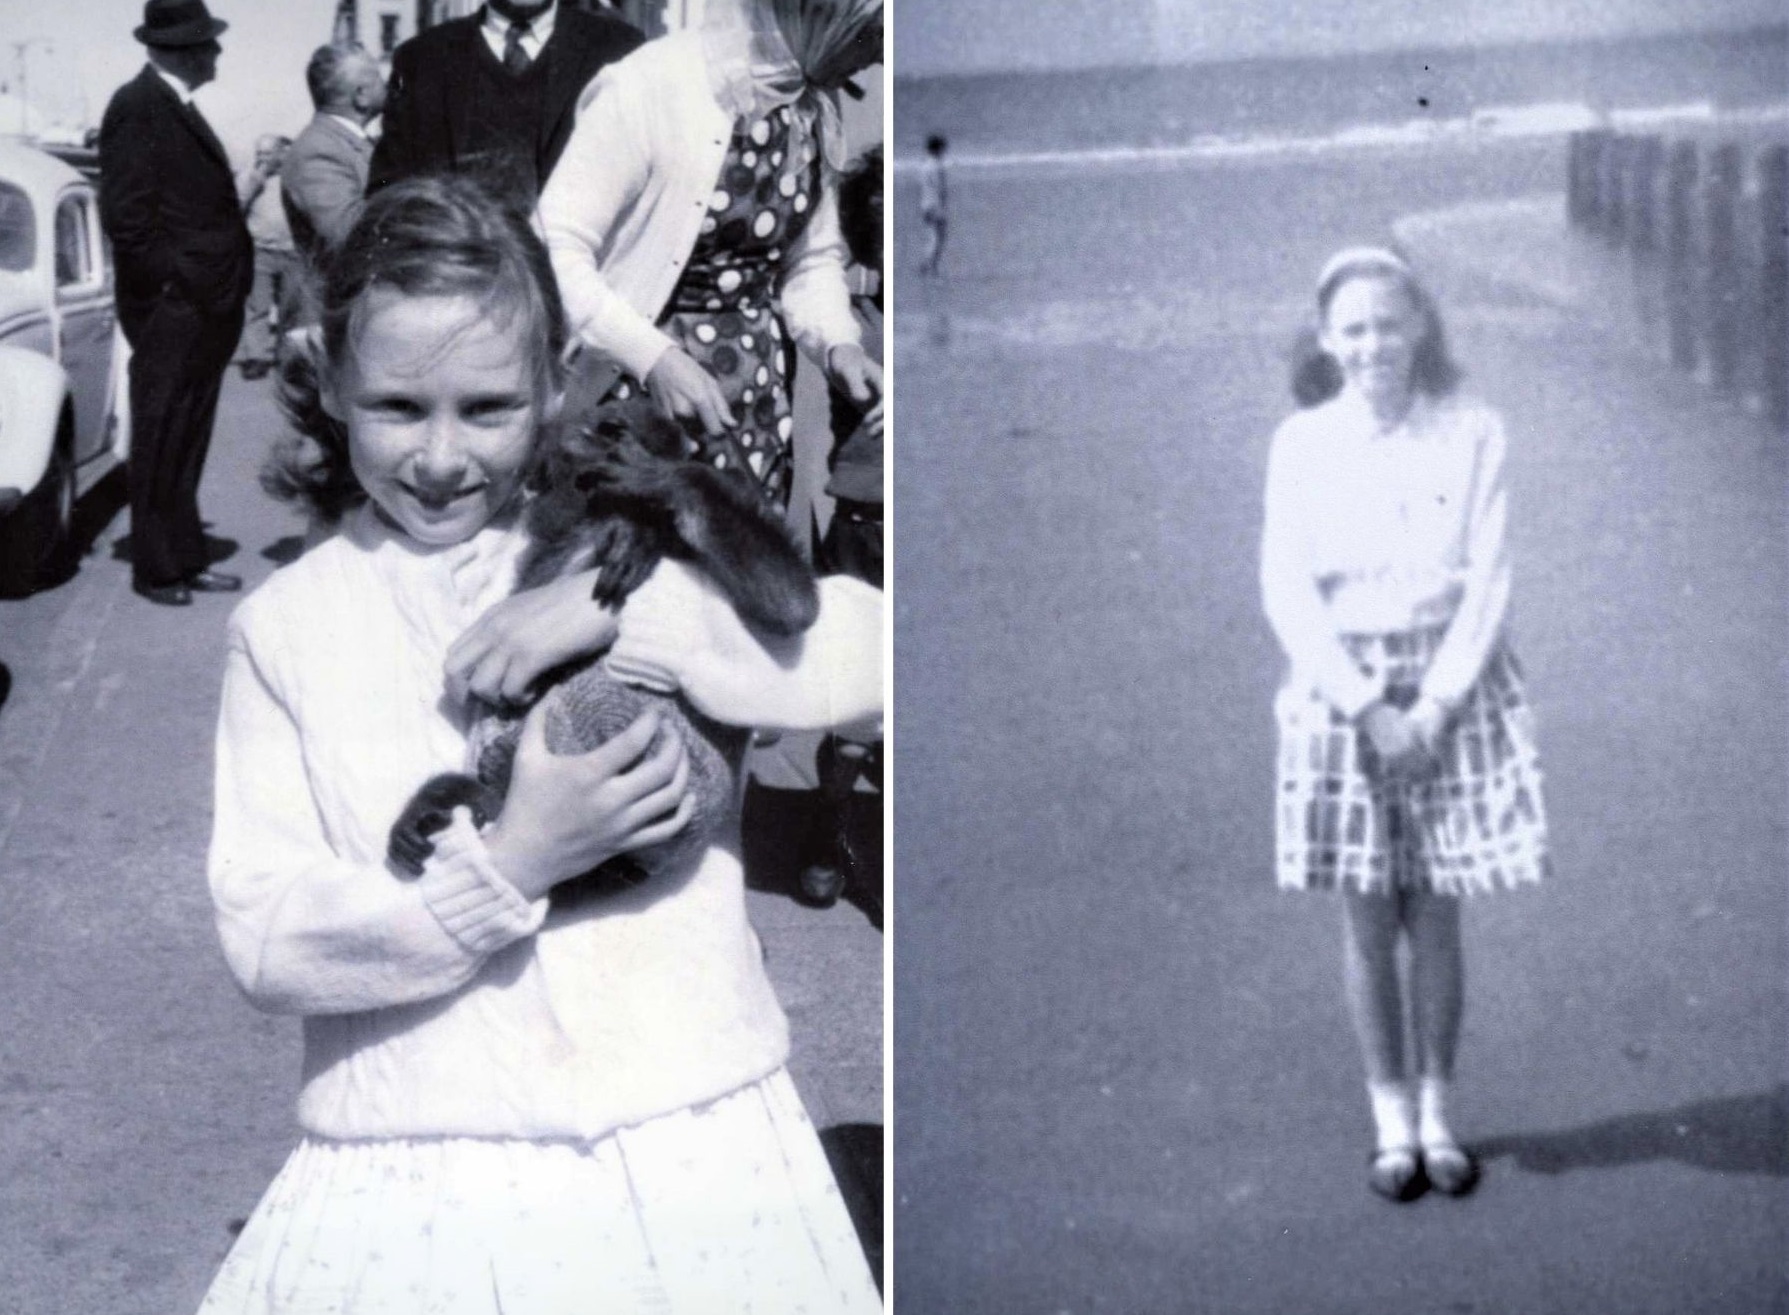 Kathleen Davies, on the Rhyl prom, summer 1963/64 left) and Rhyl beach, 1968 (right).